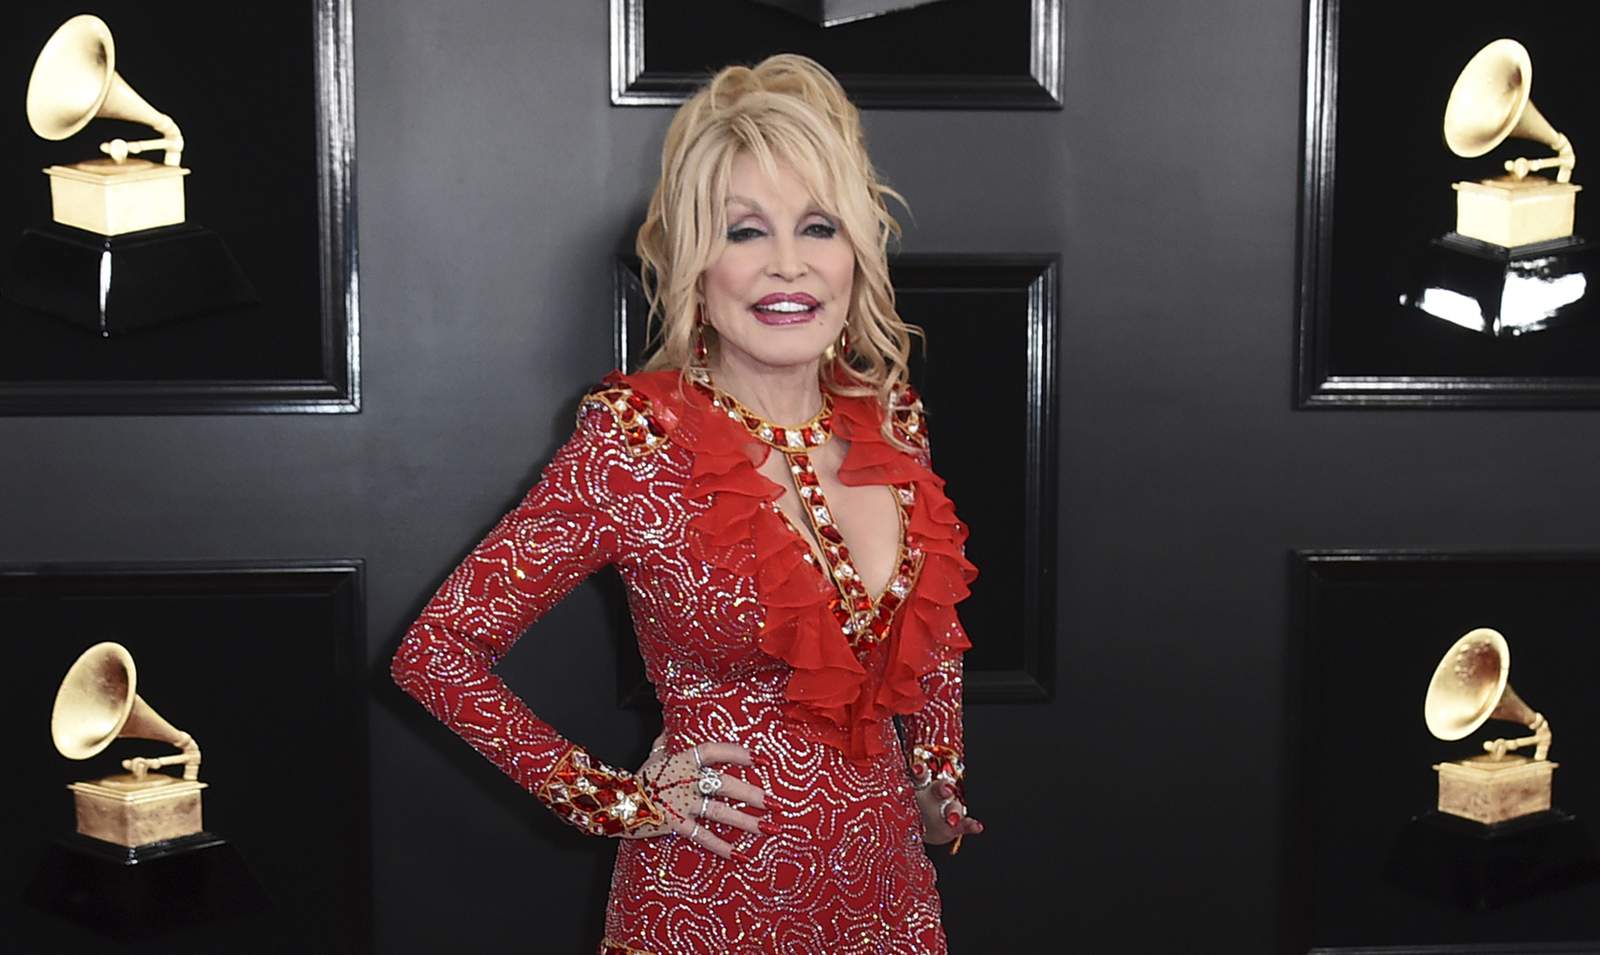 A Dolly Parton class is in session at Eckerd College